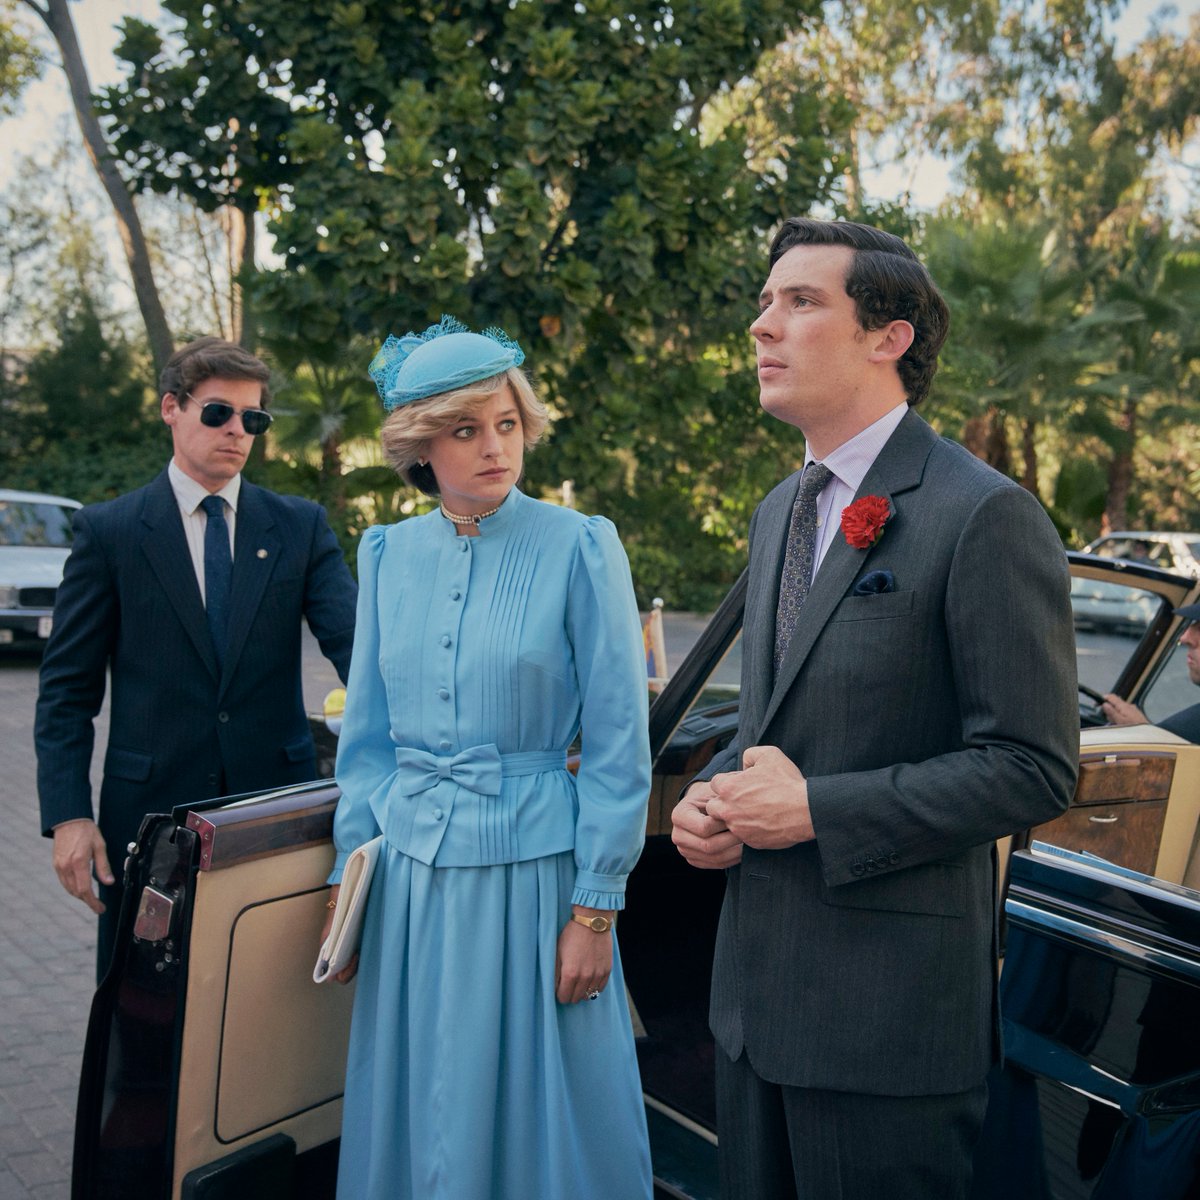 In the final episode of s4, we leave the royal family as Charles and Diana's marriage is about to break and Prime Minister Margaret Thatcher leaves office after 11 years in power.